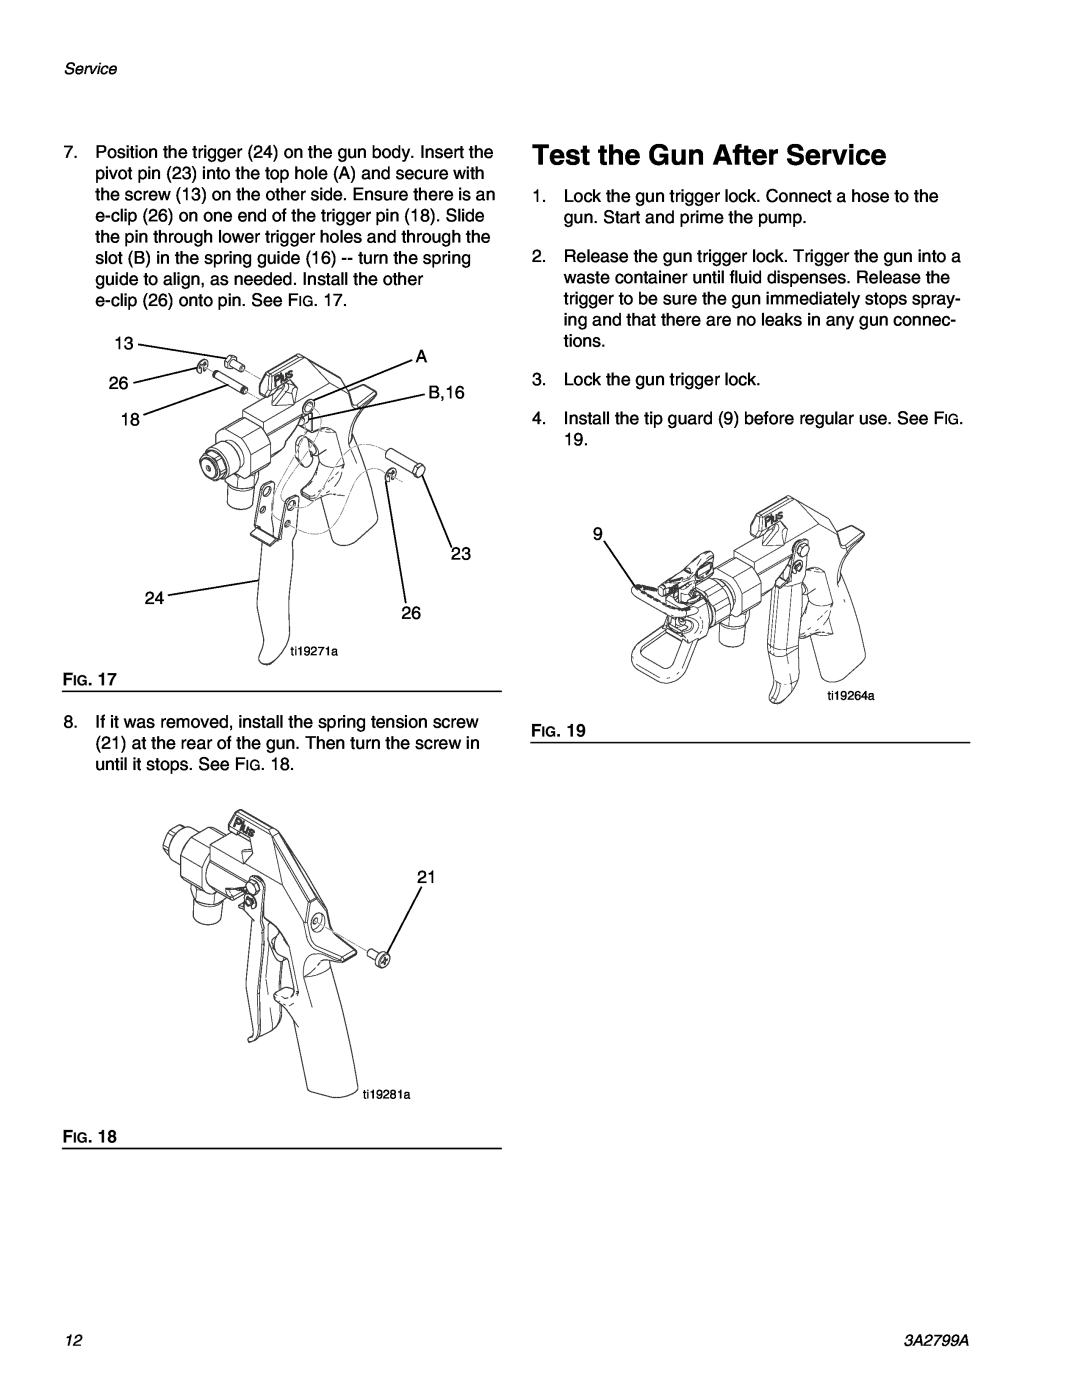 Graco Series A, 262854 important safety instructions Test the Gun After Service 